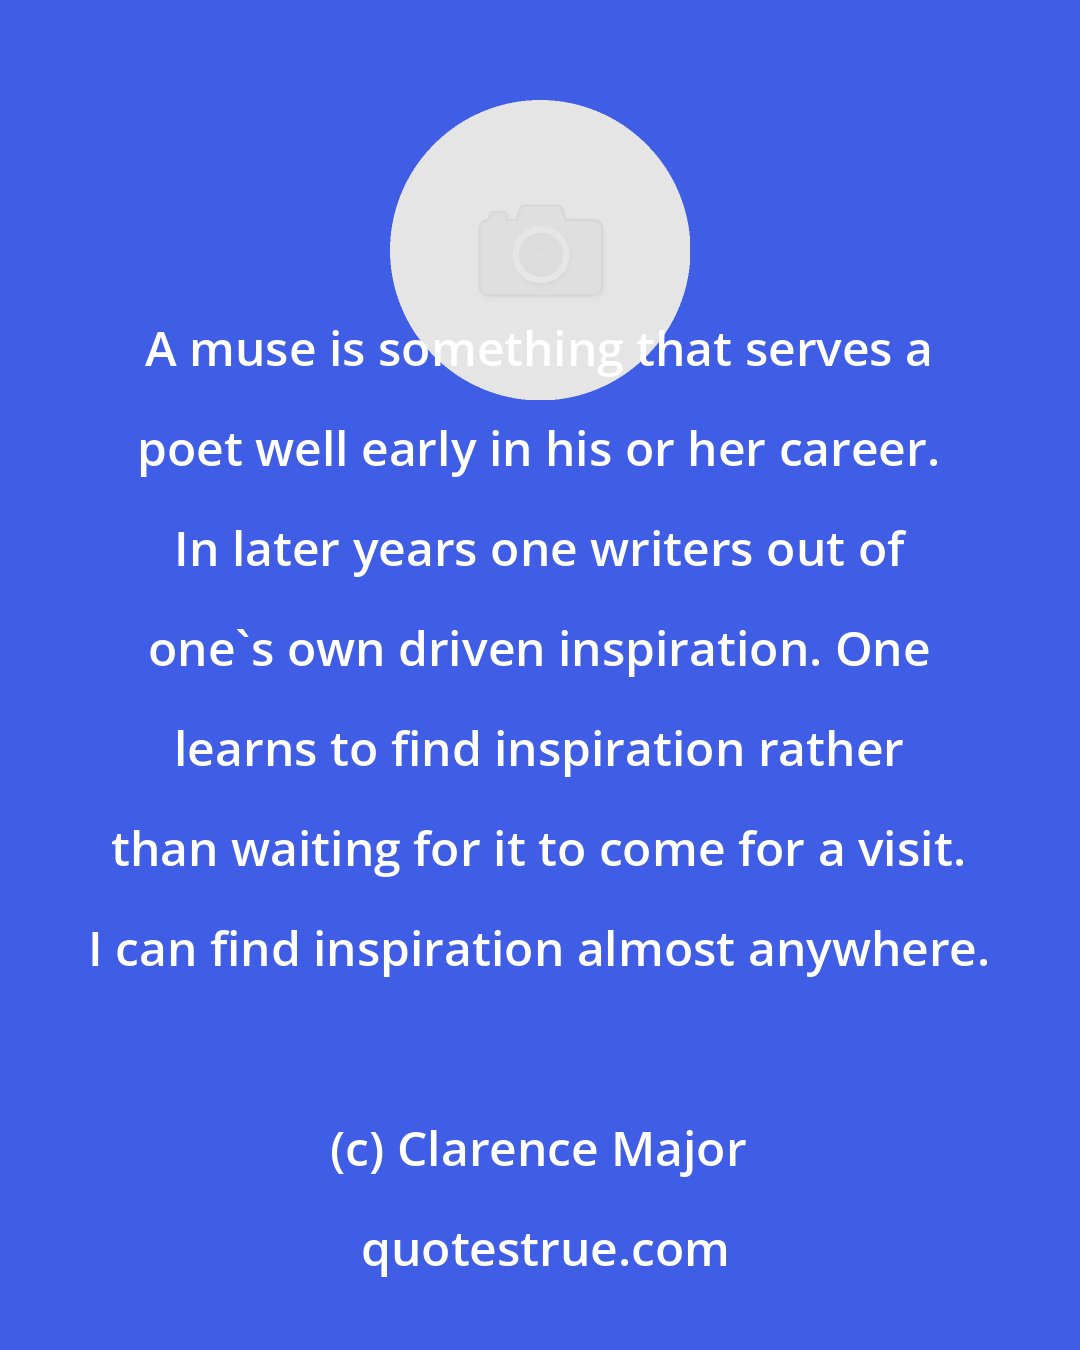 Clarence Major: A muse is something that serves a poet well early in his or her career. In later years one writers out of one's own driven inspiration. One learns to find inspiration rather than waiting for it to come for a visit. I can find inspiration almost anywhere.